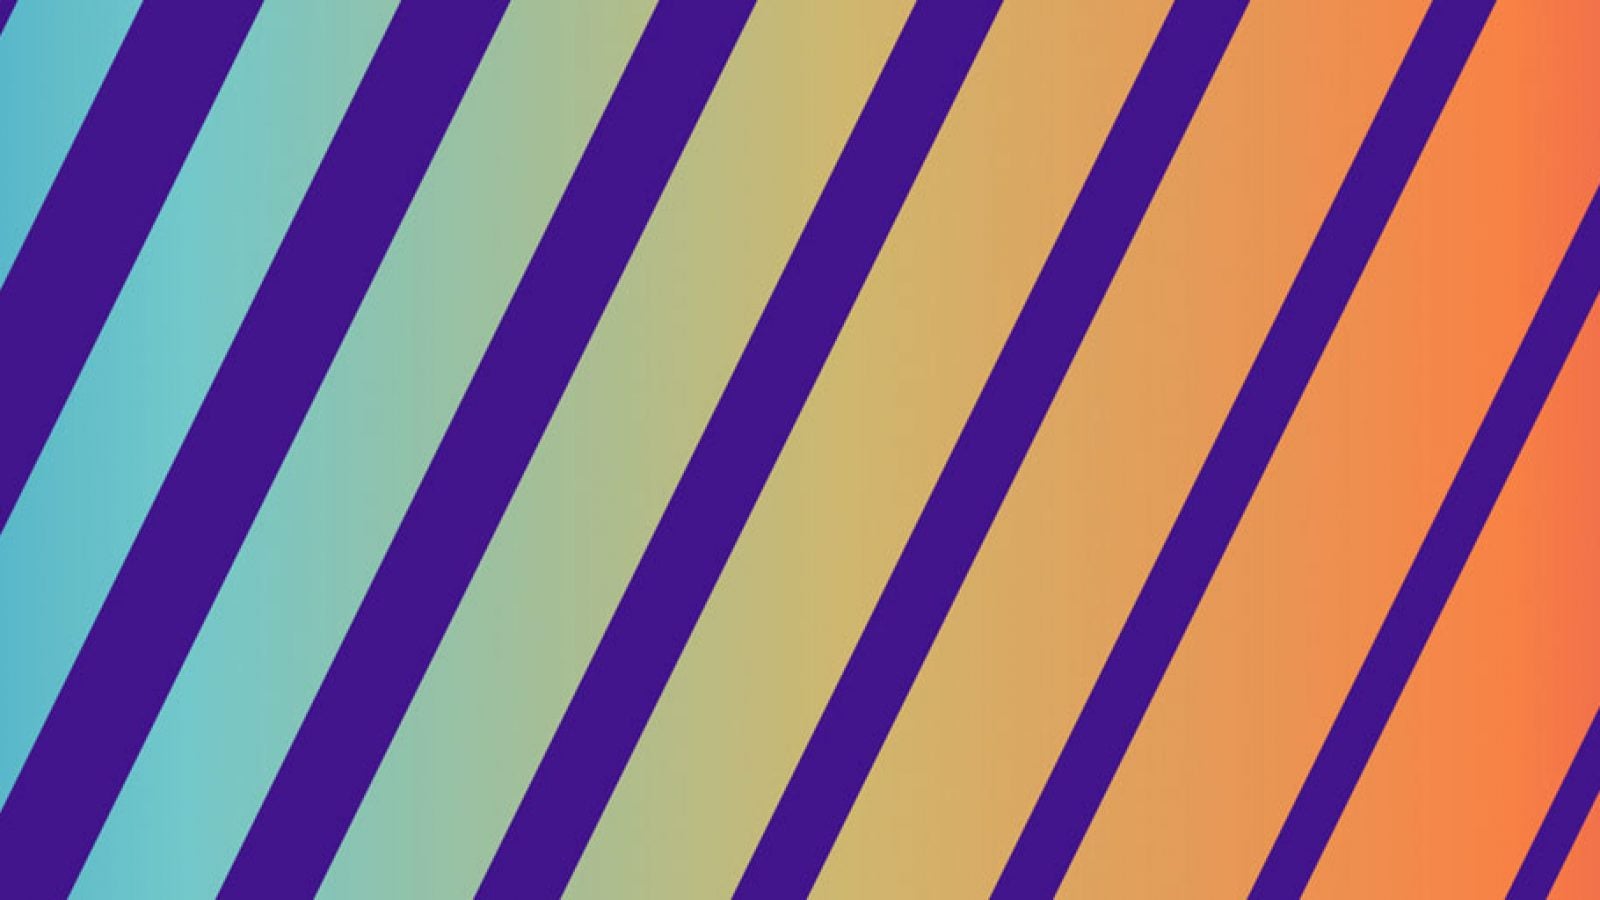 A striped background